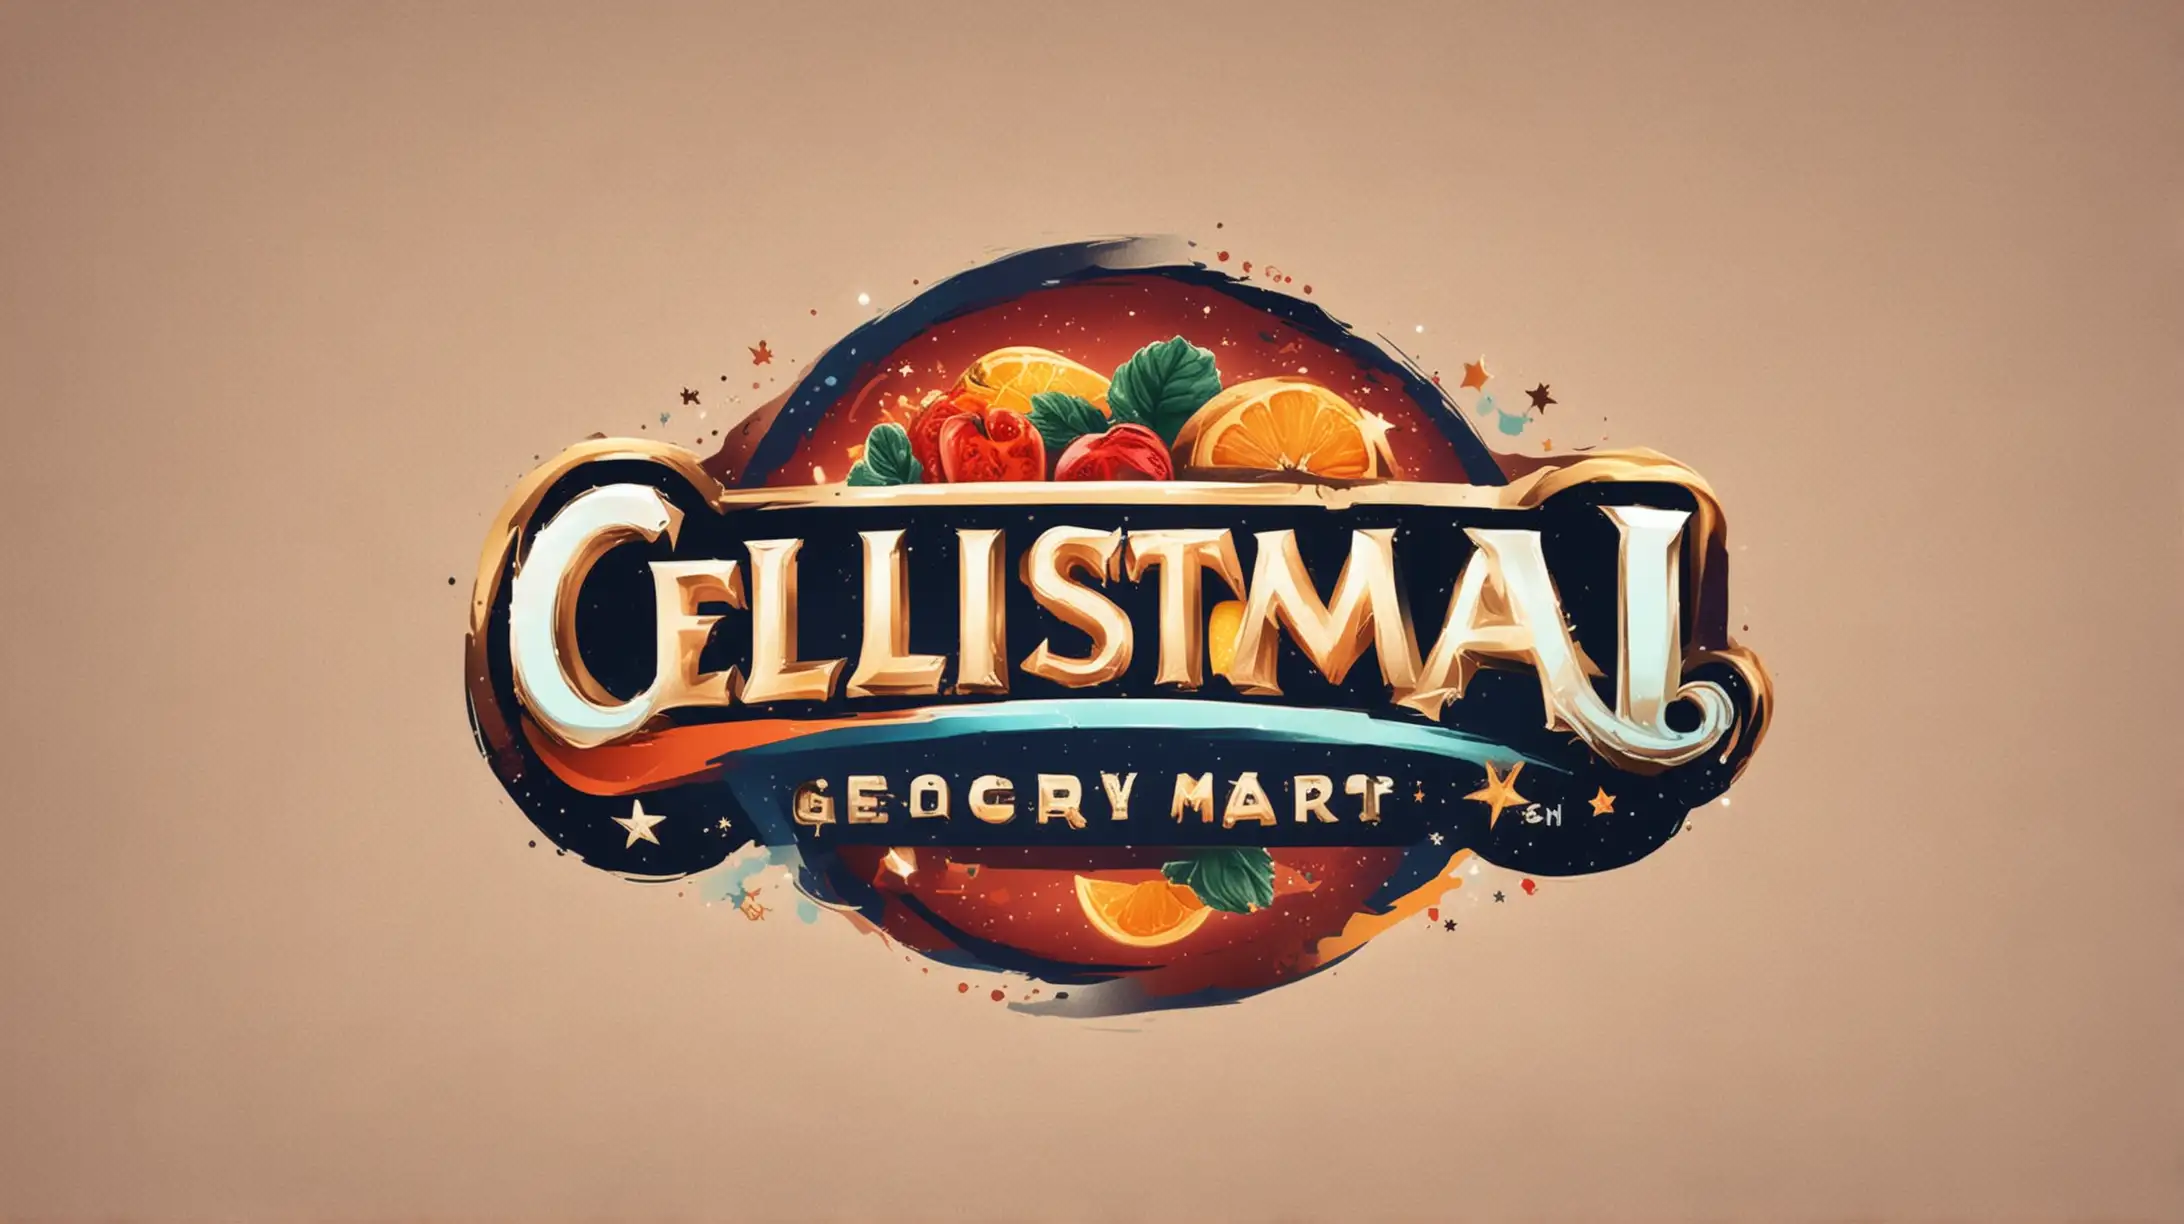 Celestial Mart Online Grocery Store Logo with Light Background